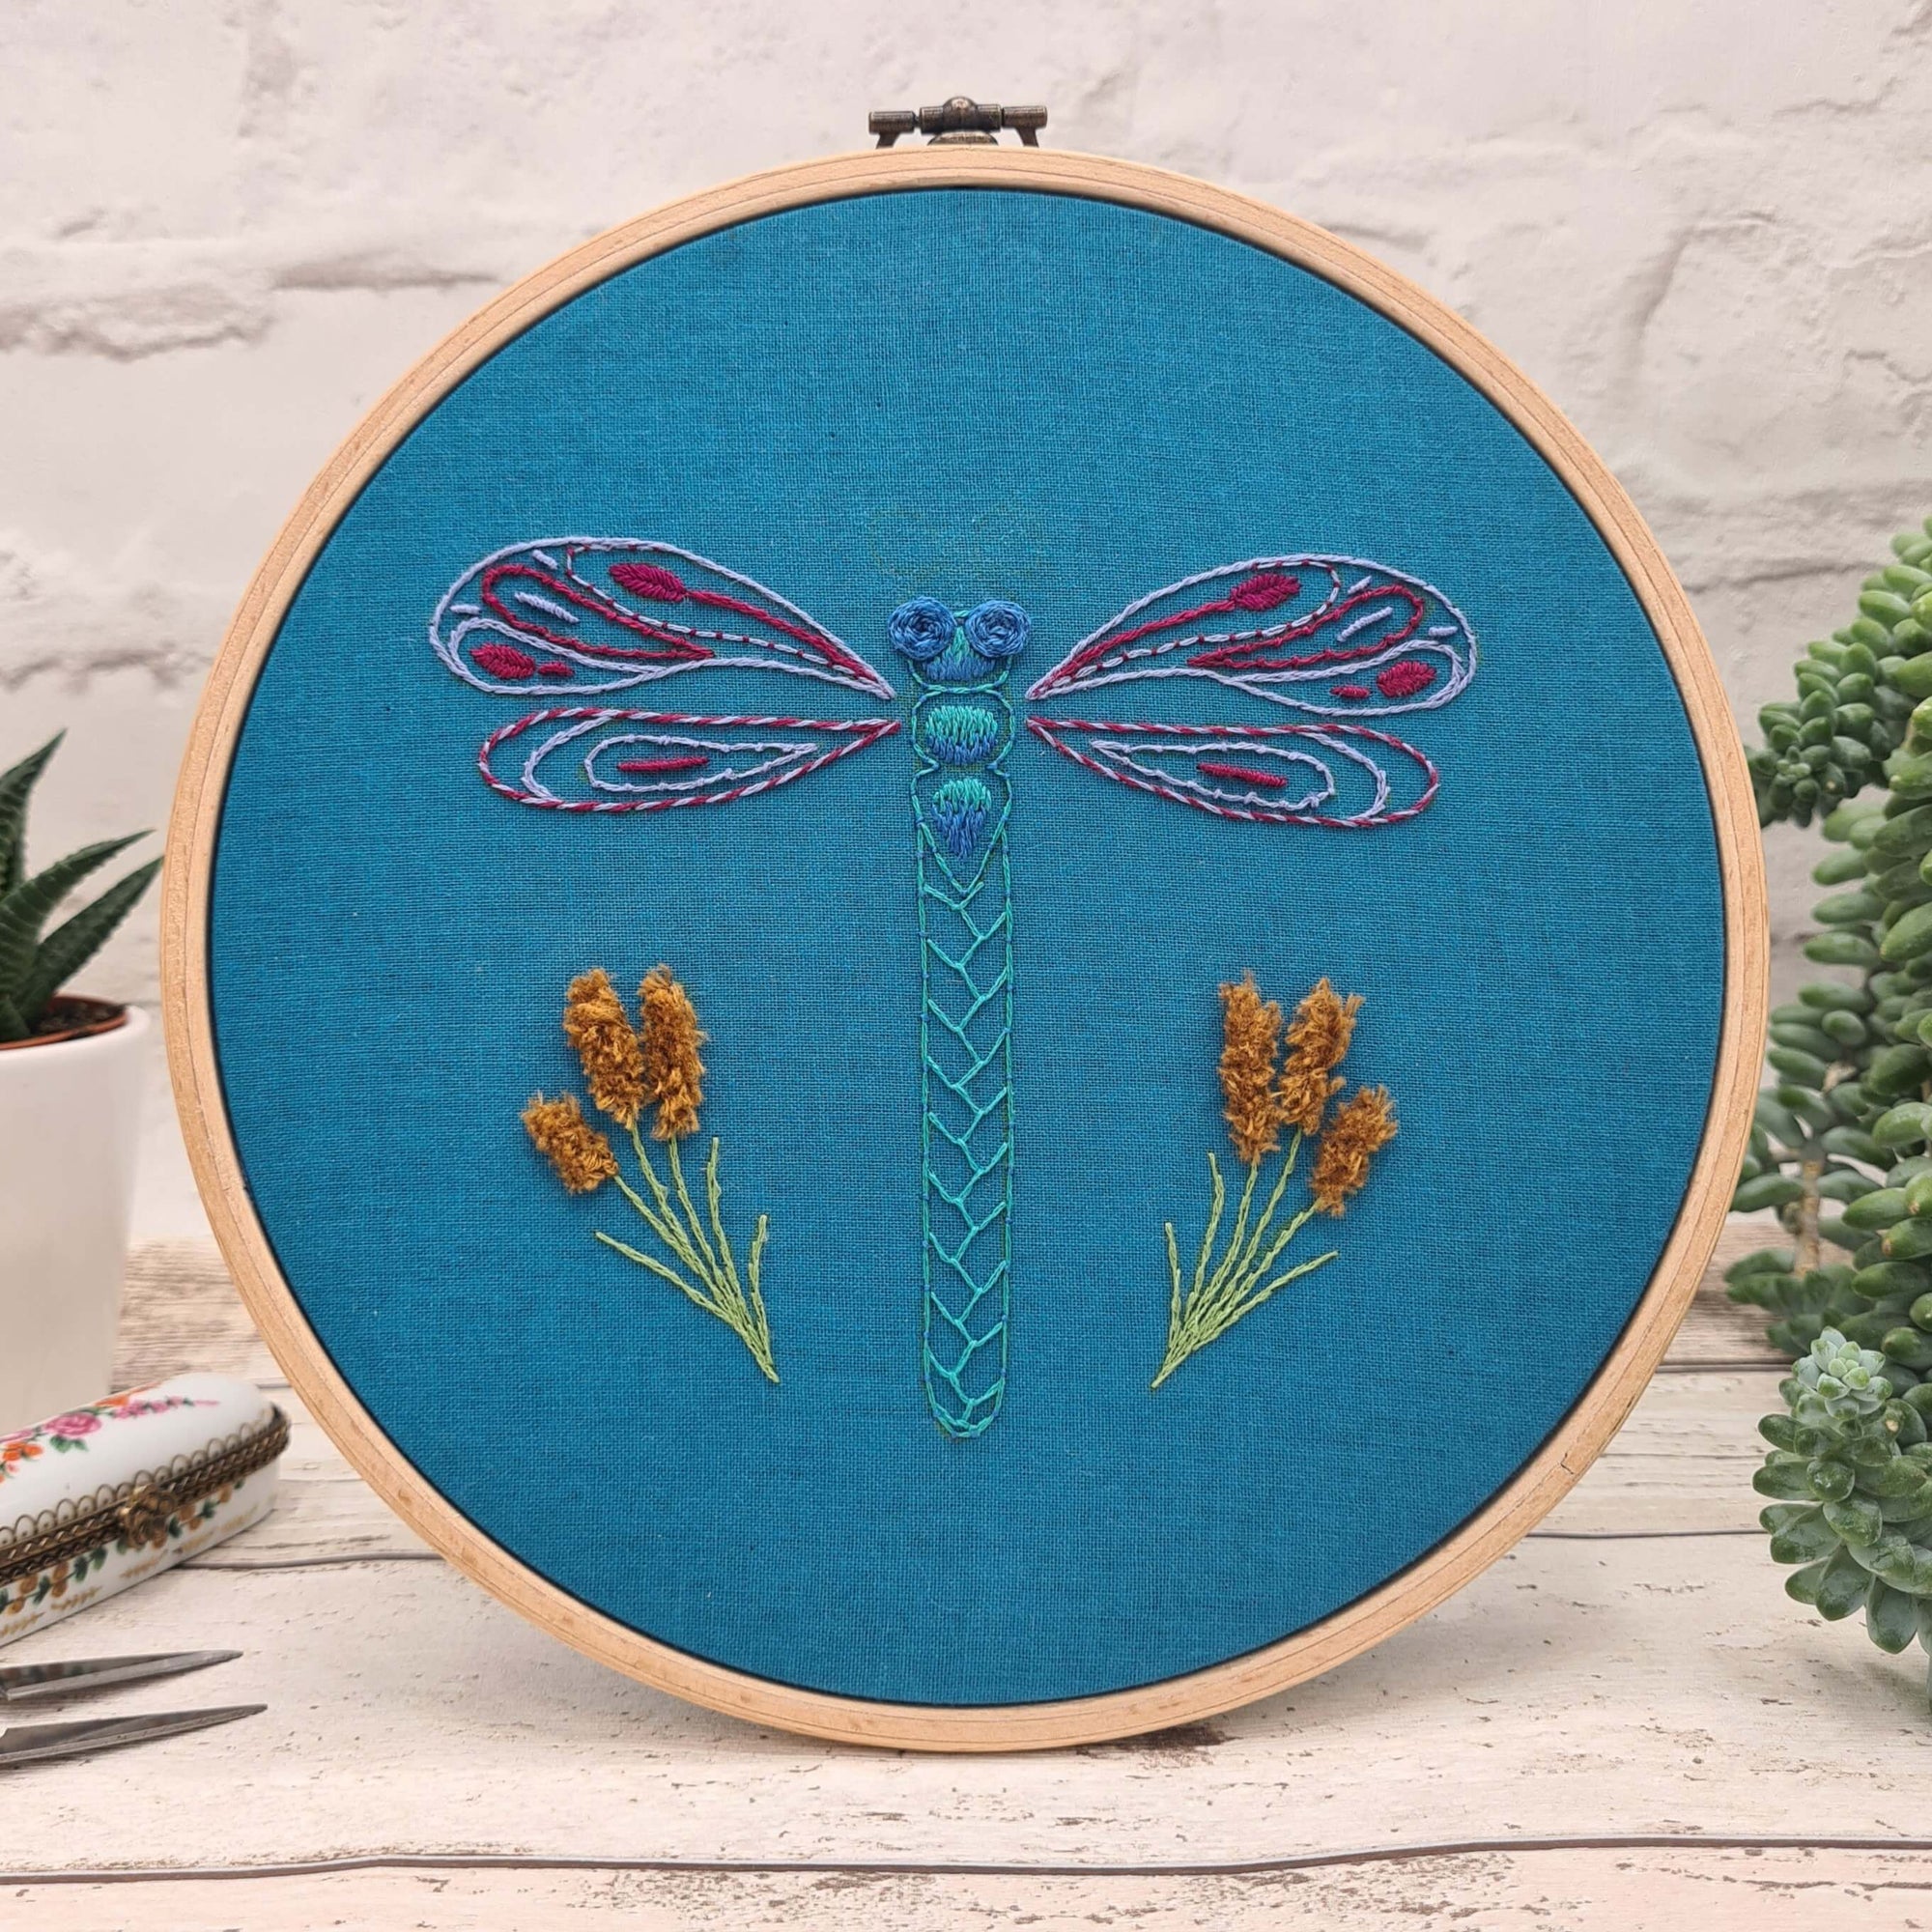 Paraffle Embroidery Pattern Dragonfly Embroidery Pattern